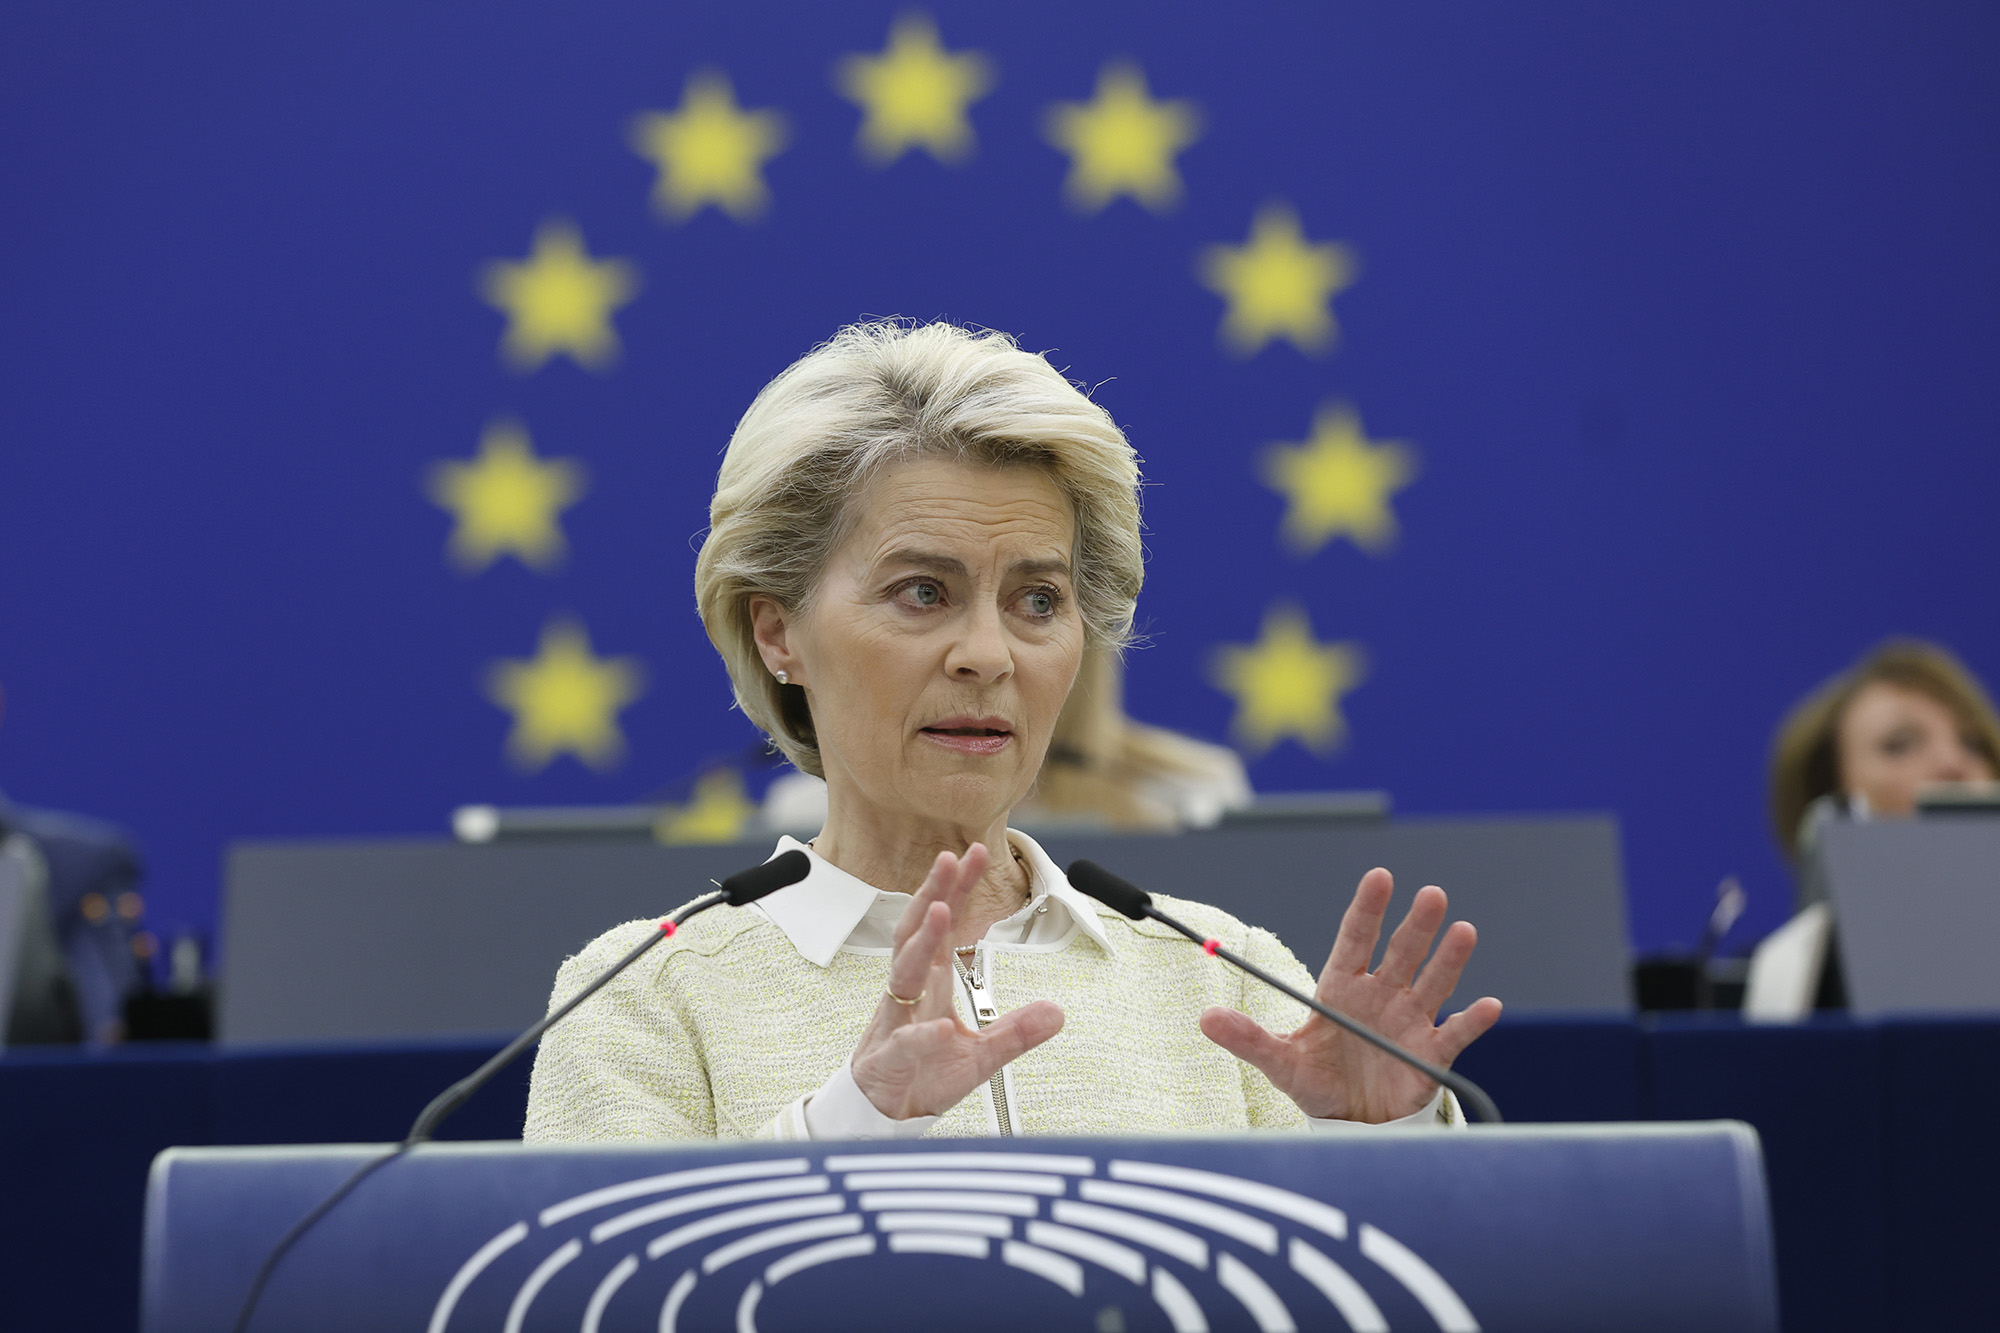 European Commission President Ursula von der Leyen delivers her speech during a debate on the social and economic consequences for the EU of the Russian war in Ukraine, on May 4, at the European Parliament in Strasbourg, France.